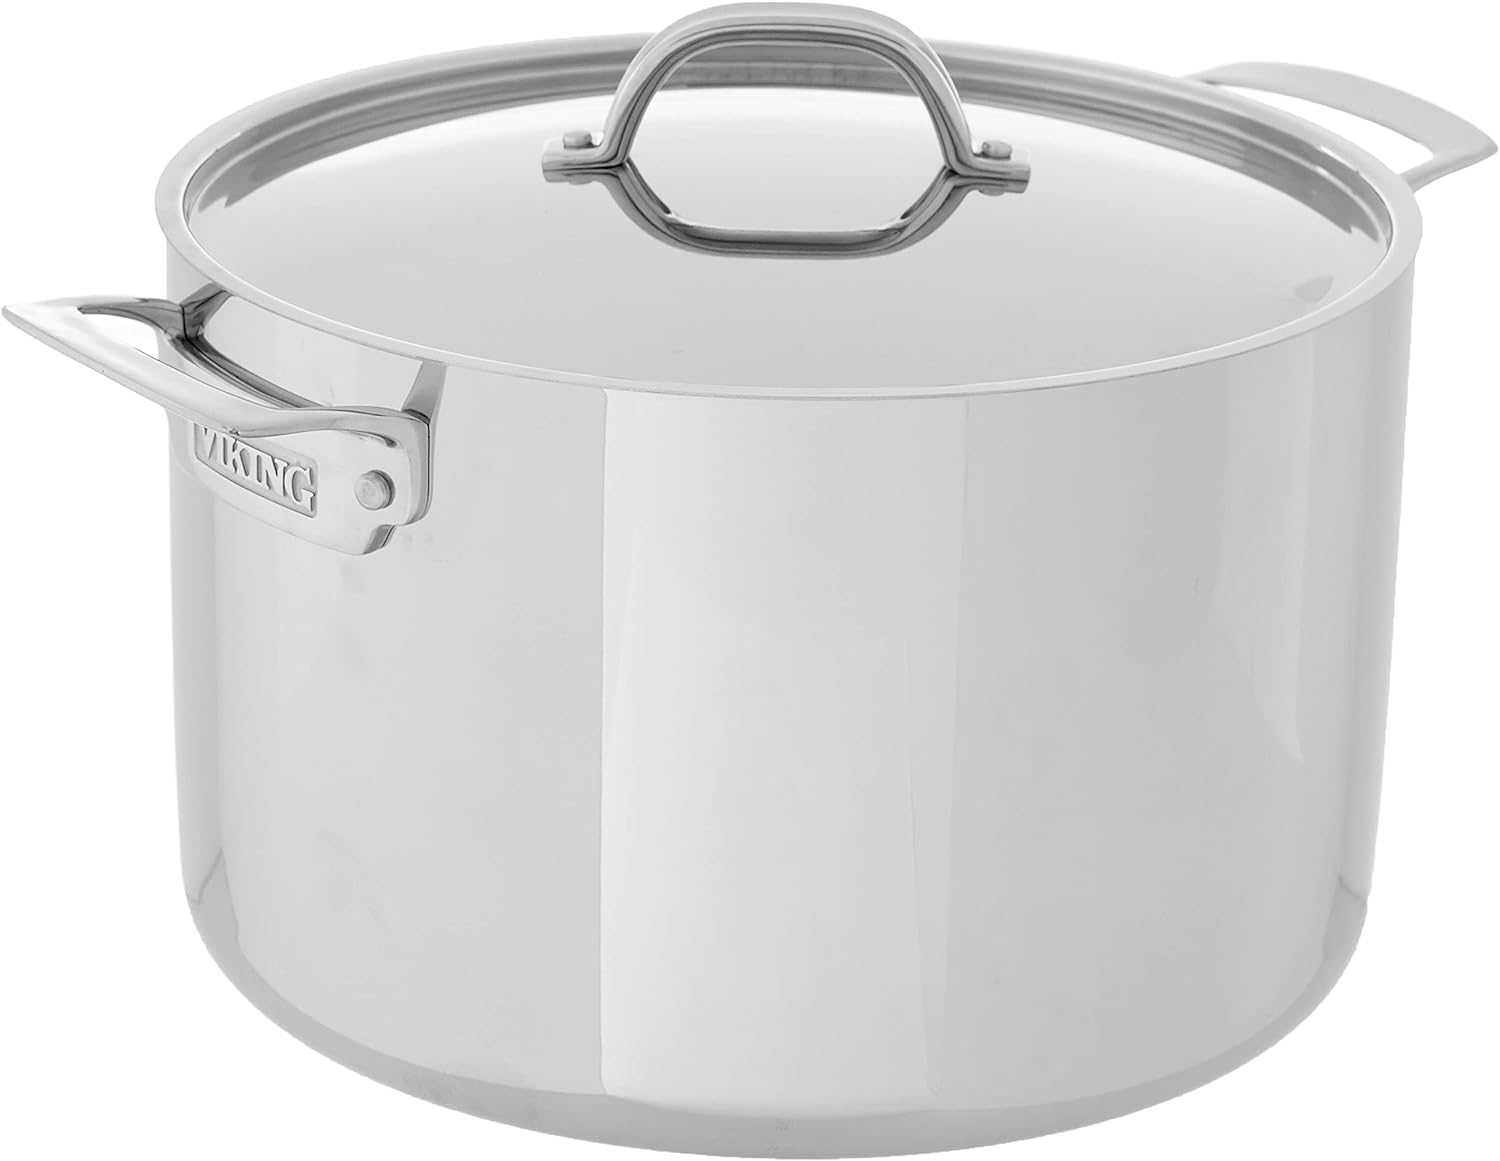 This is now our go-to pot for large soups, stews, and chilis. it also works for pasta of course.it is extremely well made and very easy to clean, and it looks very professional.A little expensive, but it is going to last for years. We love it.